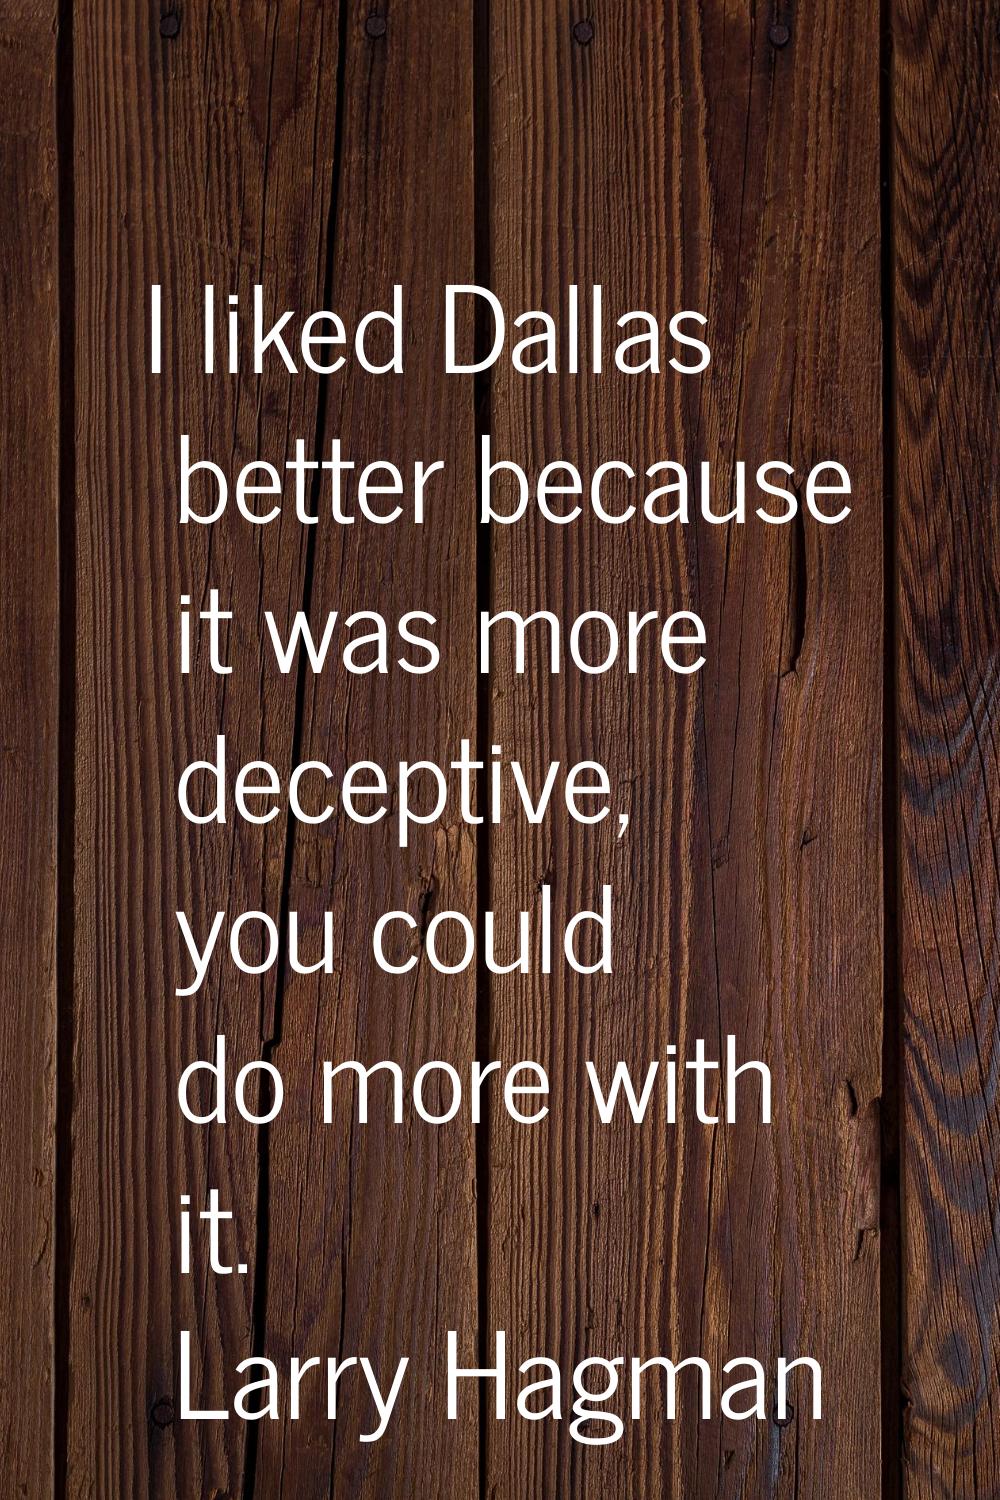 I liked Dallas better because it was more deceptive, you could do more with it.